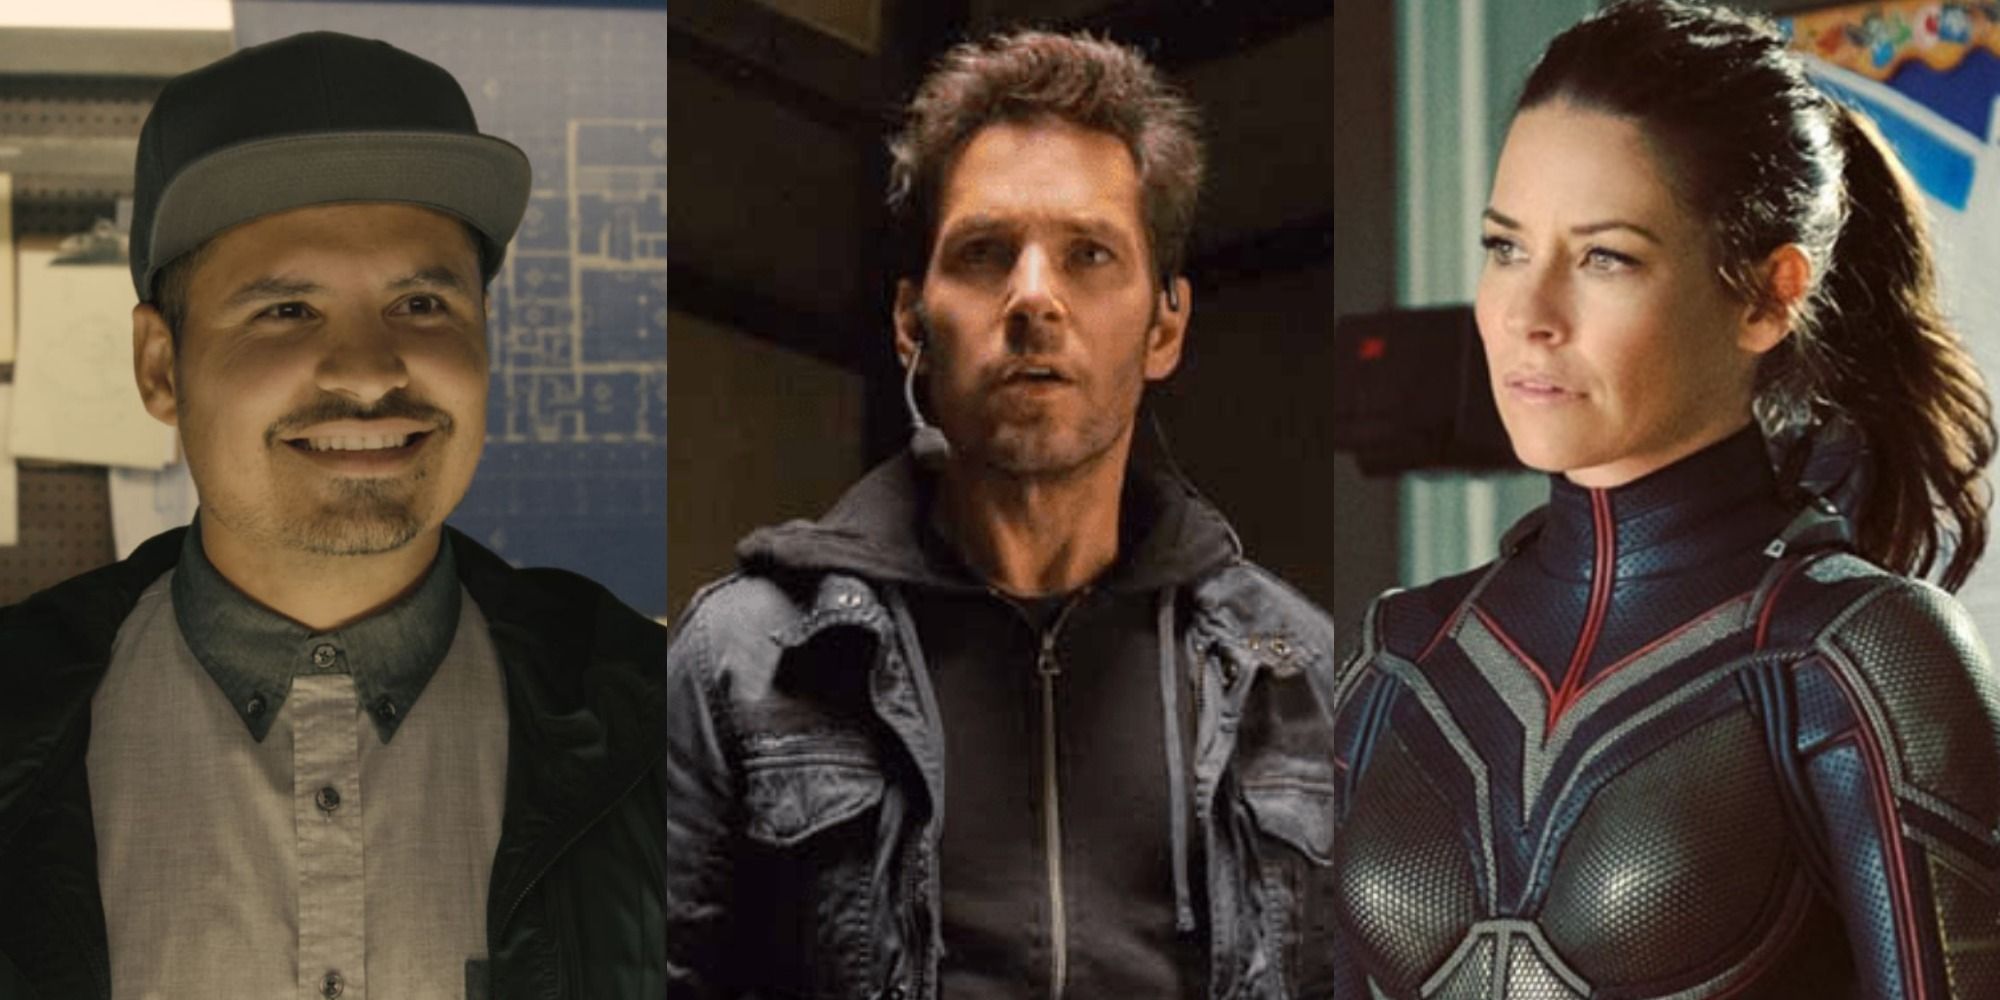 10 Best AntMan Movie Characters, Ranked By Likability